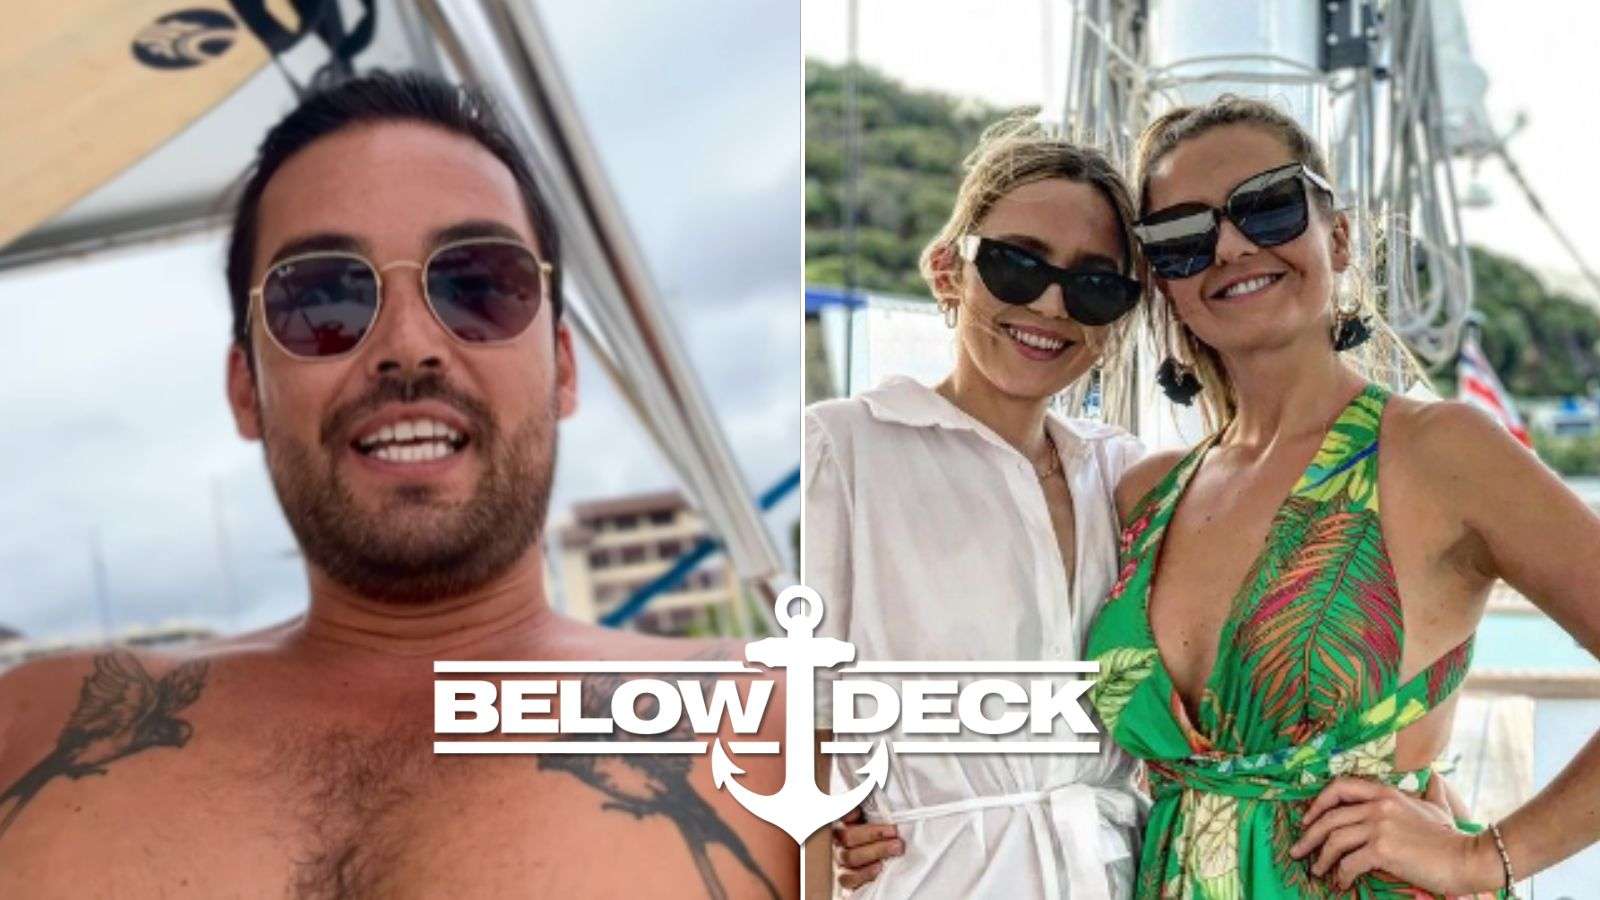 Colin, Ileisha, and Daisy from Below Deck Sailing Yacht